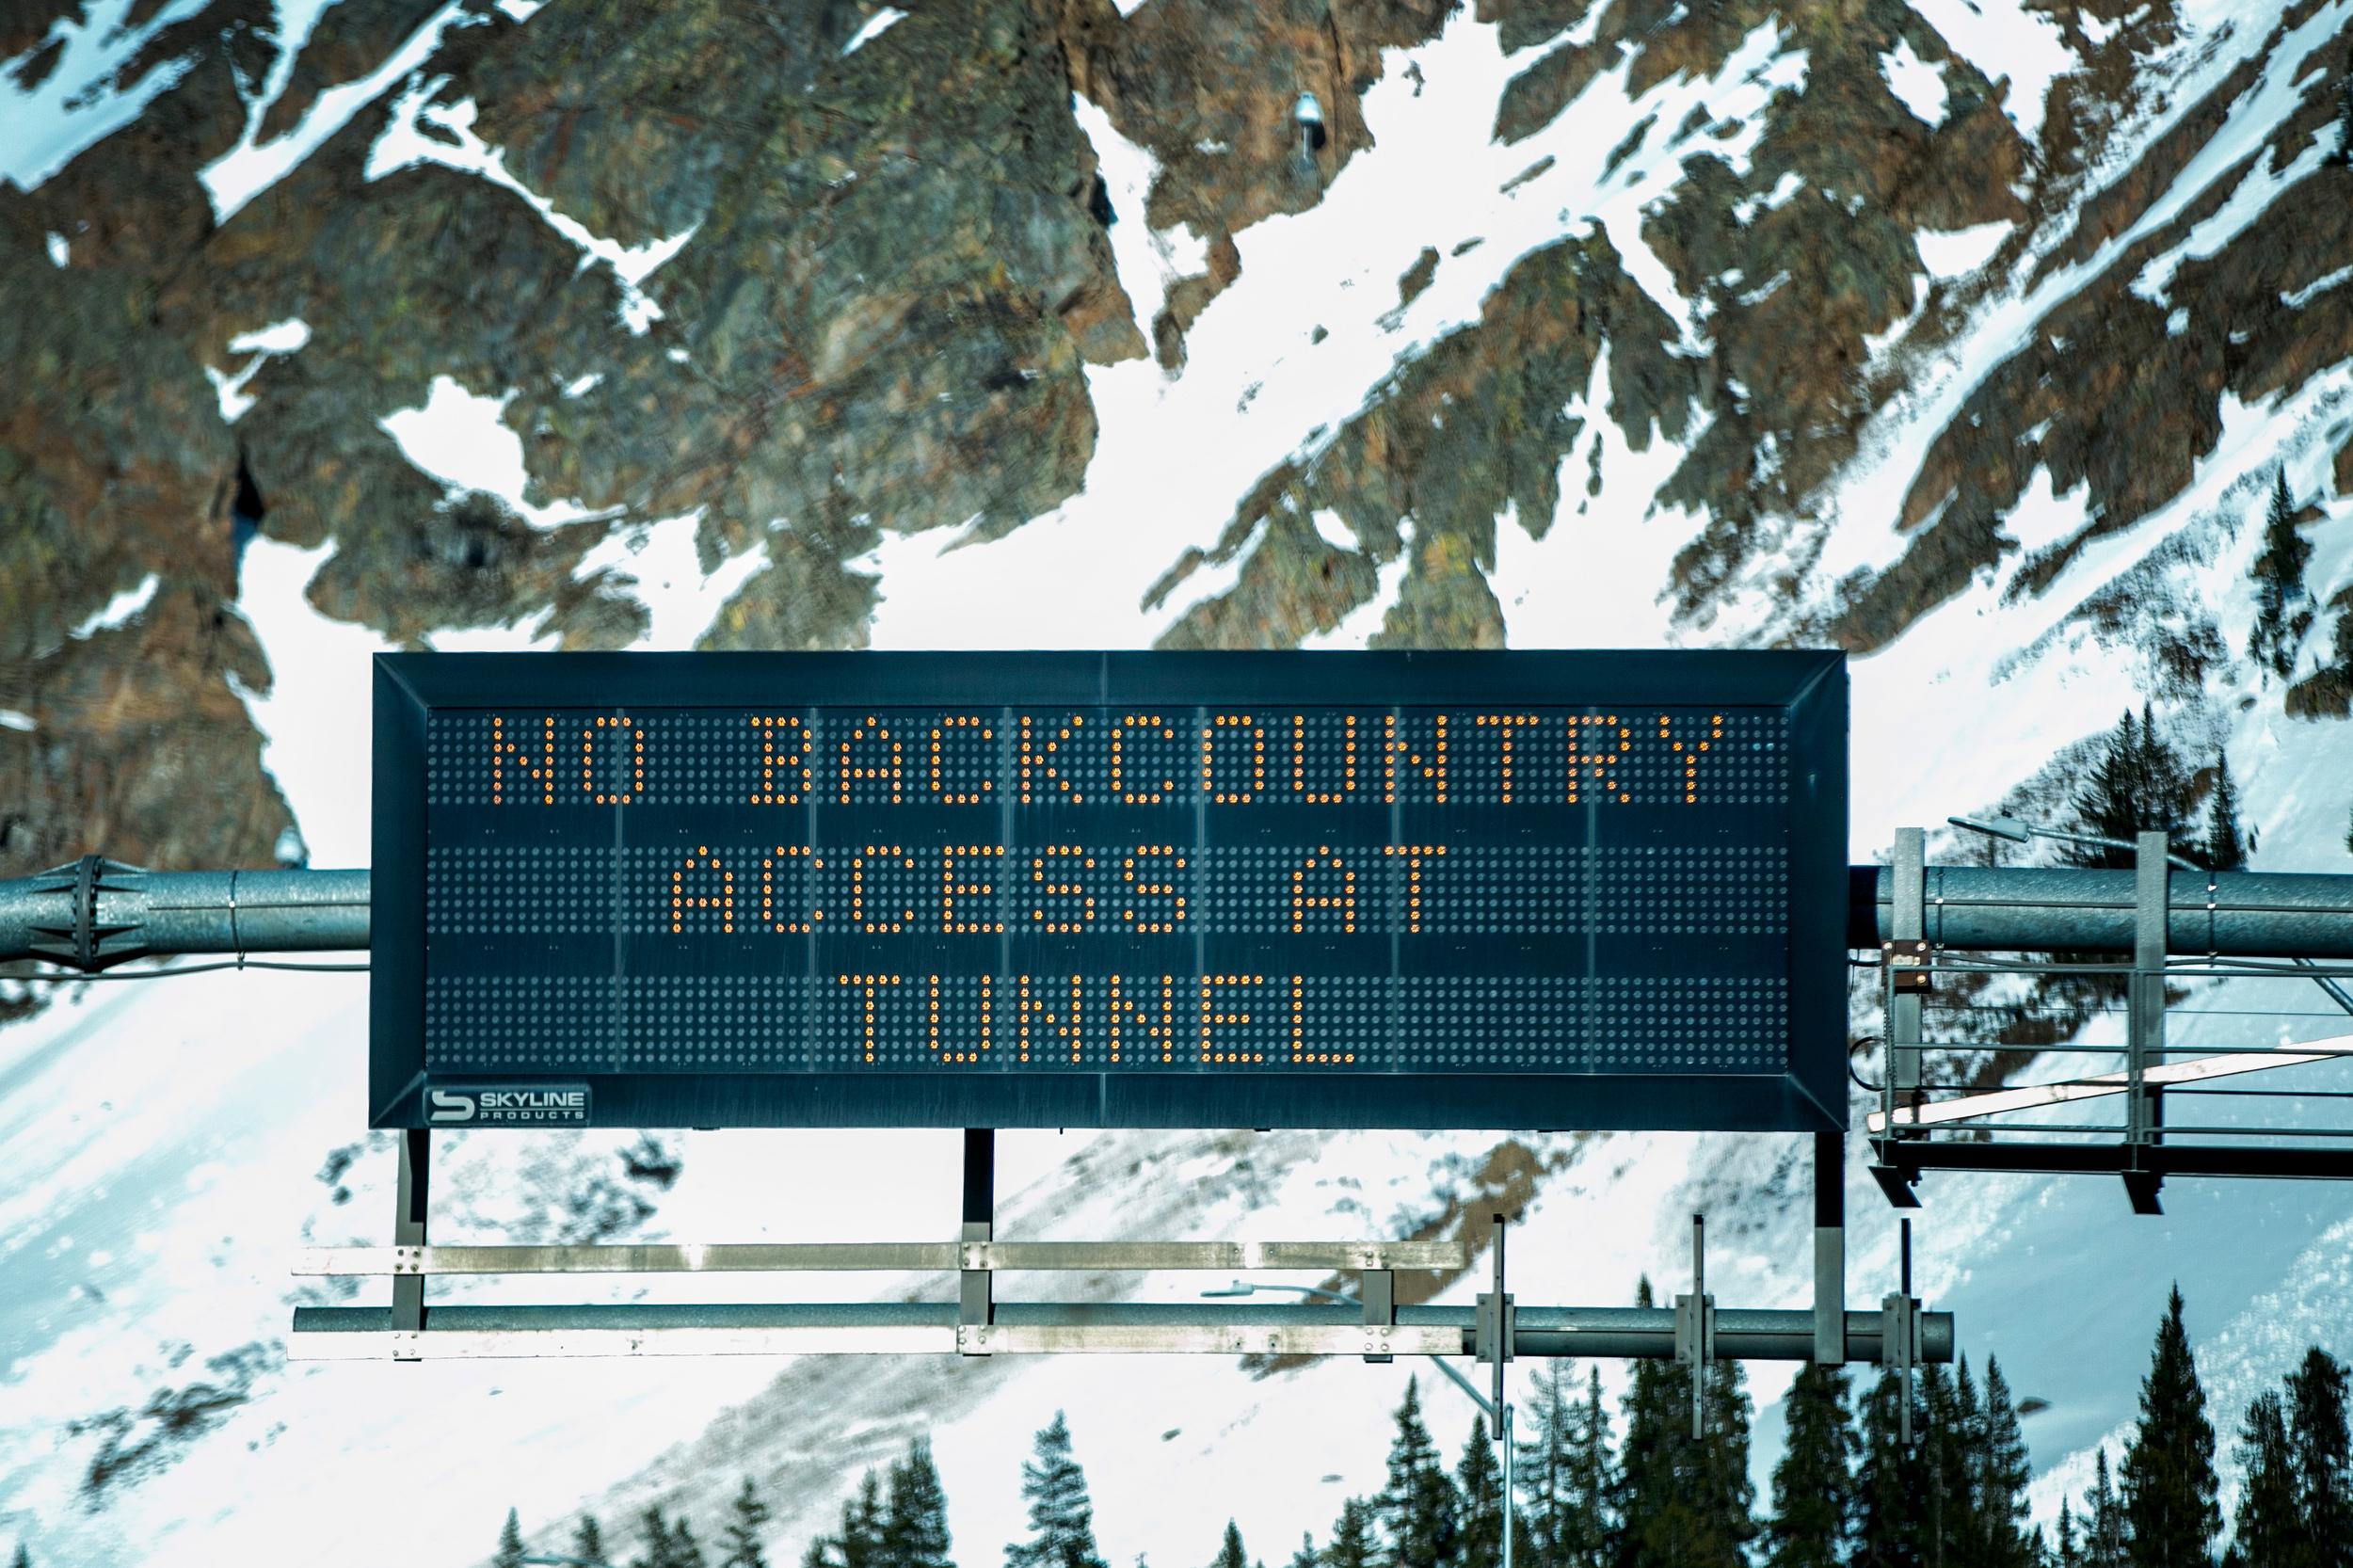 Interstate 70 Backcountry Warning Sign